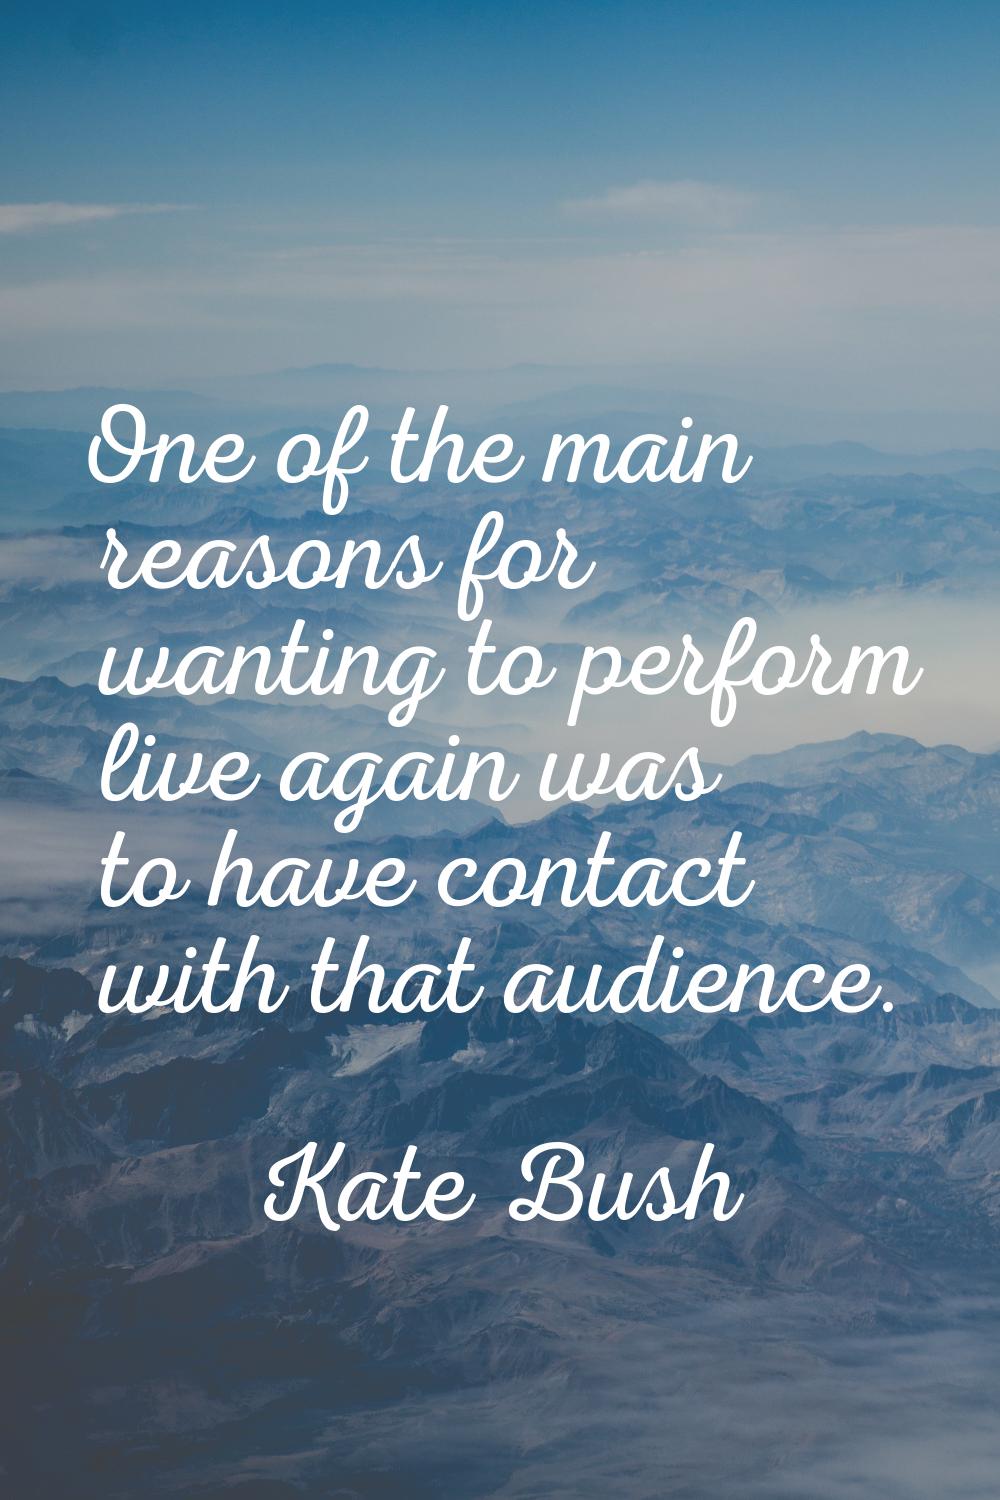 One of the main reasons for wanting to perform live again was to have contact with that audience.